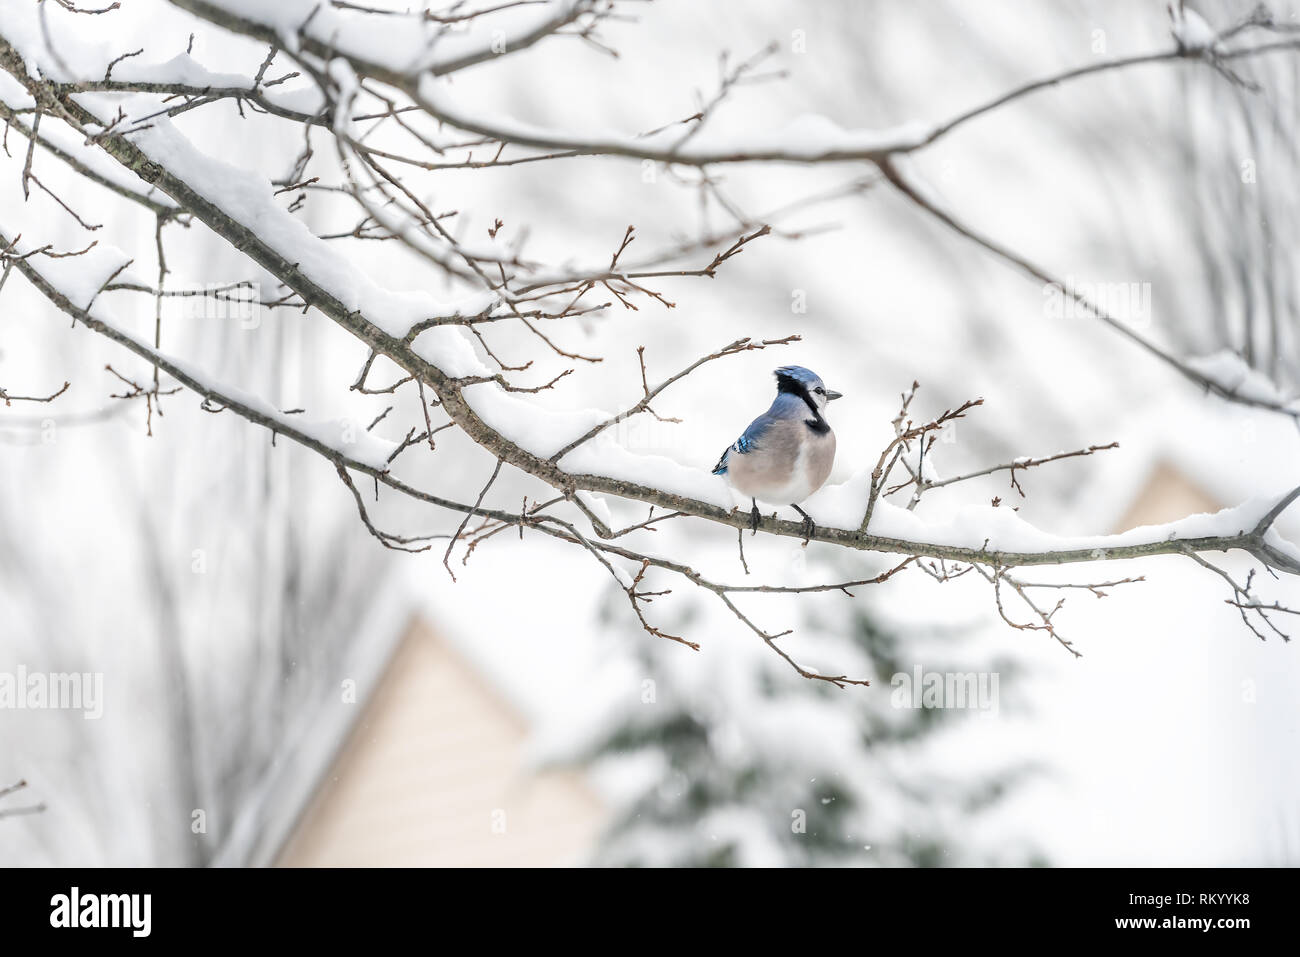 Closeup of one blue jay, Cyanocitta cristata, bird sitting perched far on oak tree branch during winter covered in snow in Virginia Stock Photo